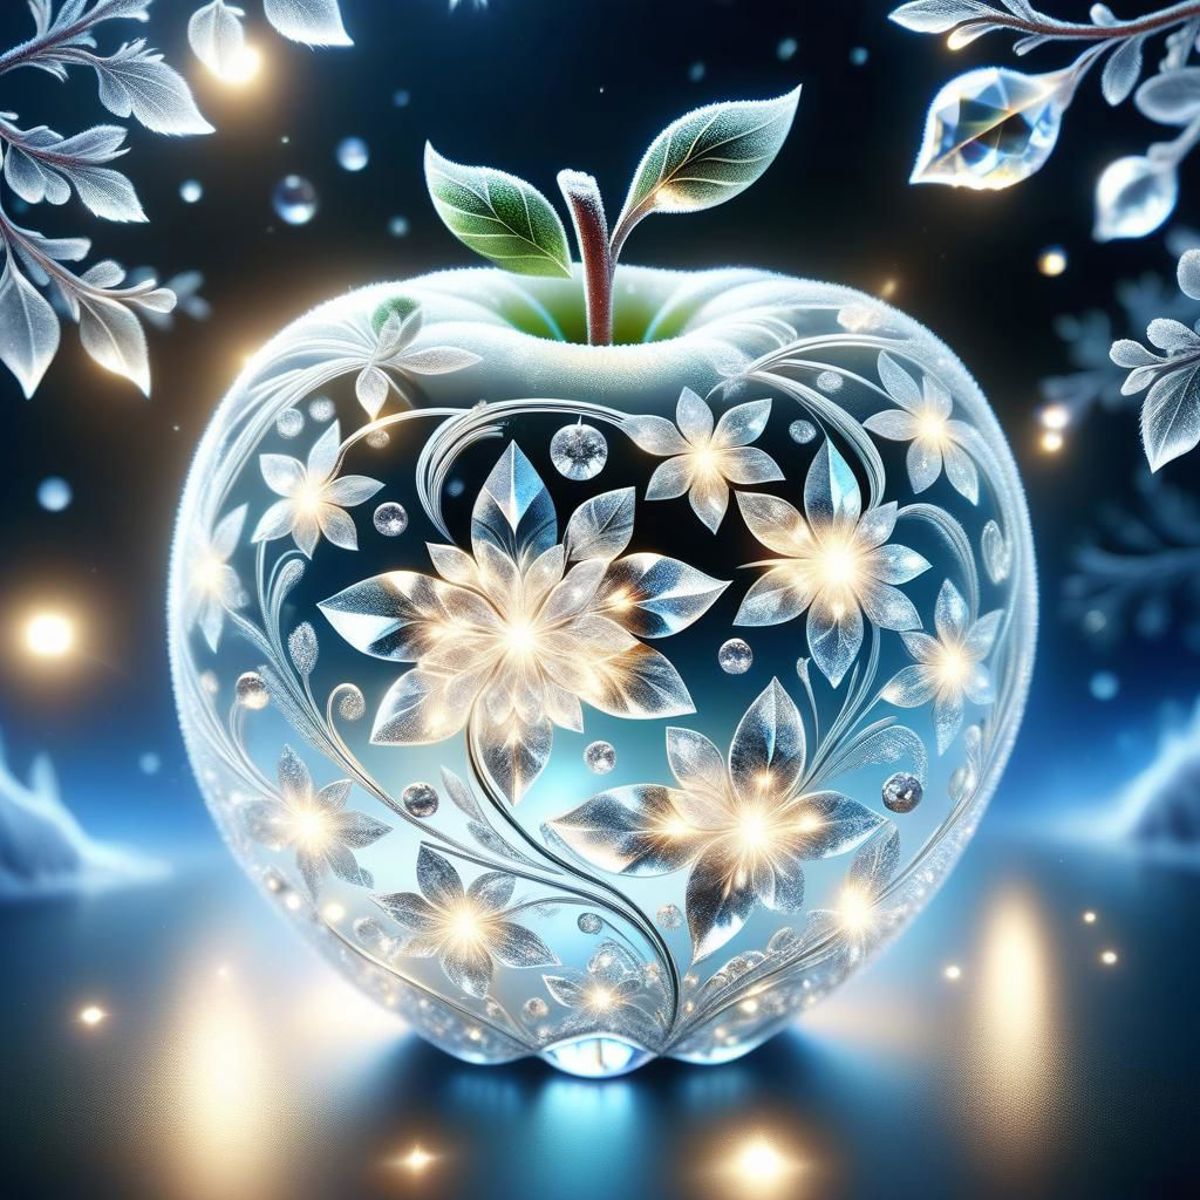 A beautifully stylized, glass apple with a flower stem and flower decorations.